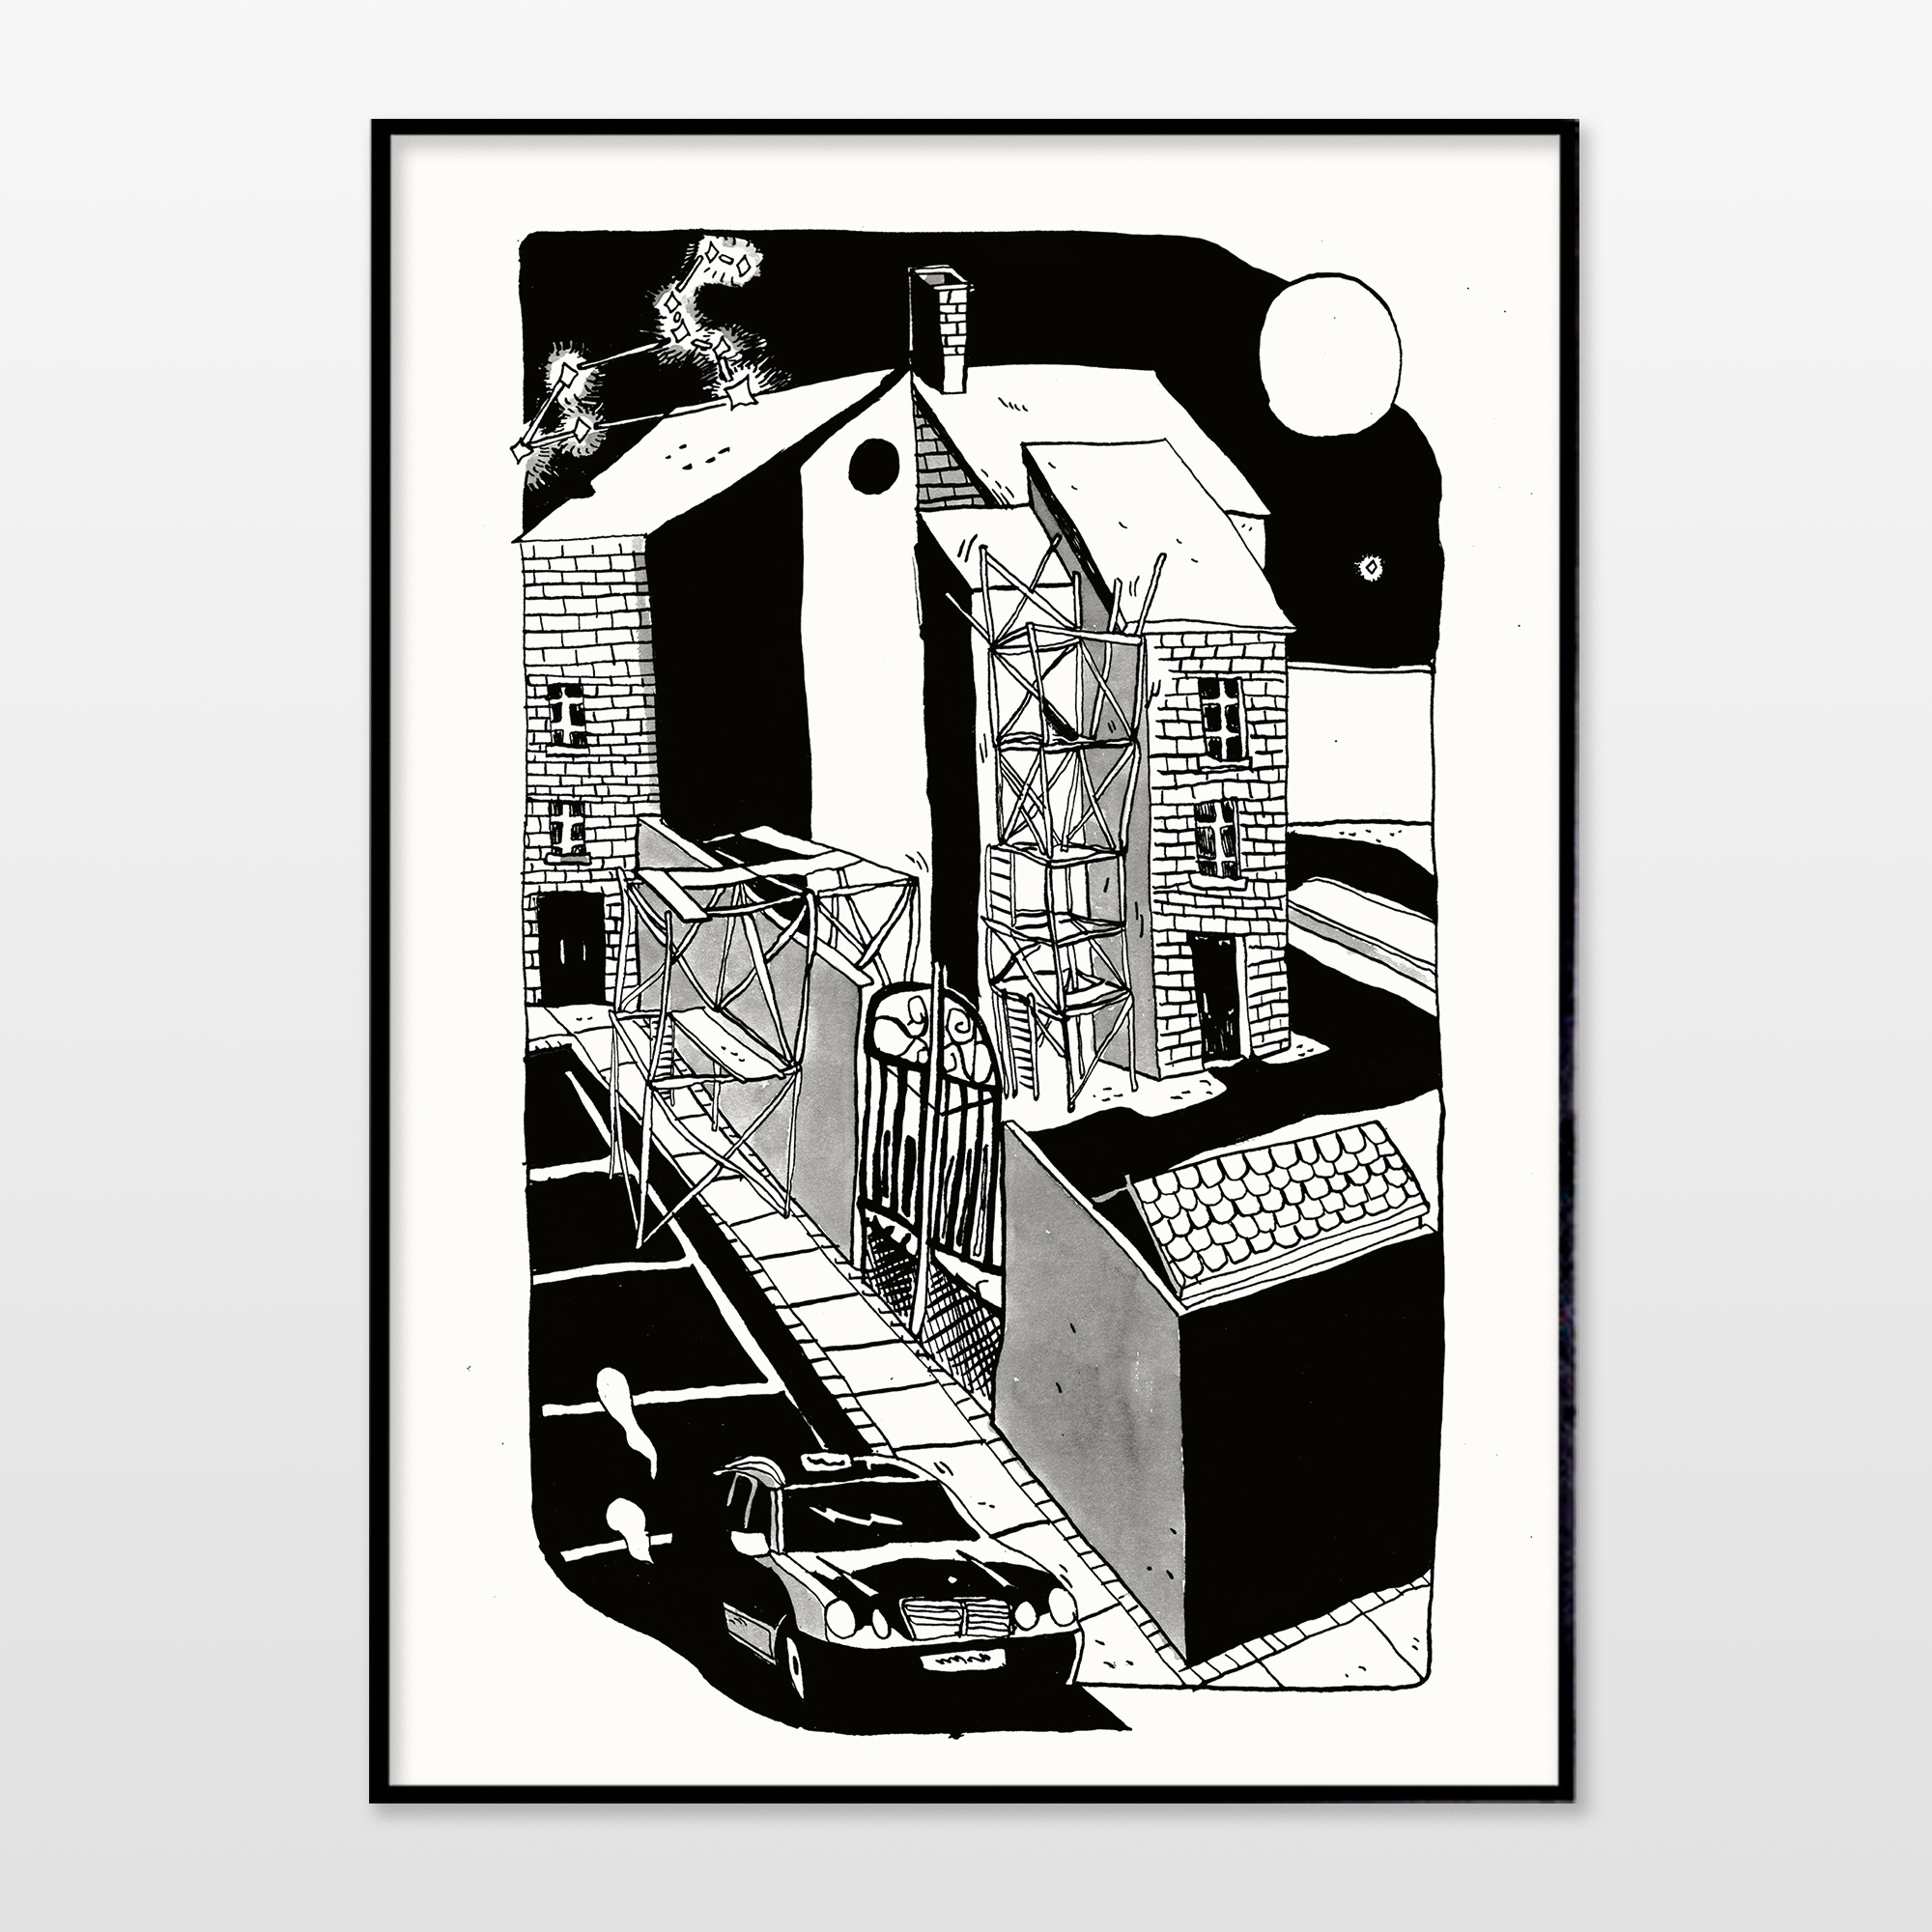 posters-prints, giclee-print, graphical, illustrative, monochrome, architecture, cartoons, movement, transportation, black, white, ink, paper, black-and-white, cars, contemporary-art, copenhagen, danish, design, modern, modern-art, nordic, posters, prints, scandinavien, time, vehicles, Buy original high quality art. Paintings, drawings, limited edition prints & posters by talented artists.